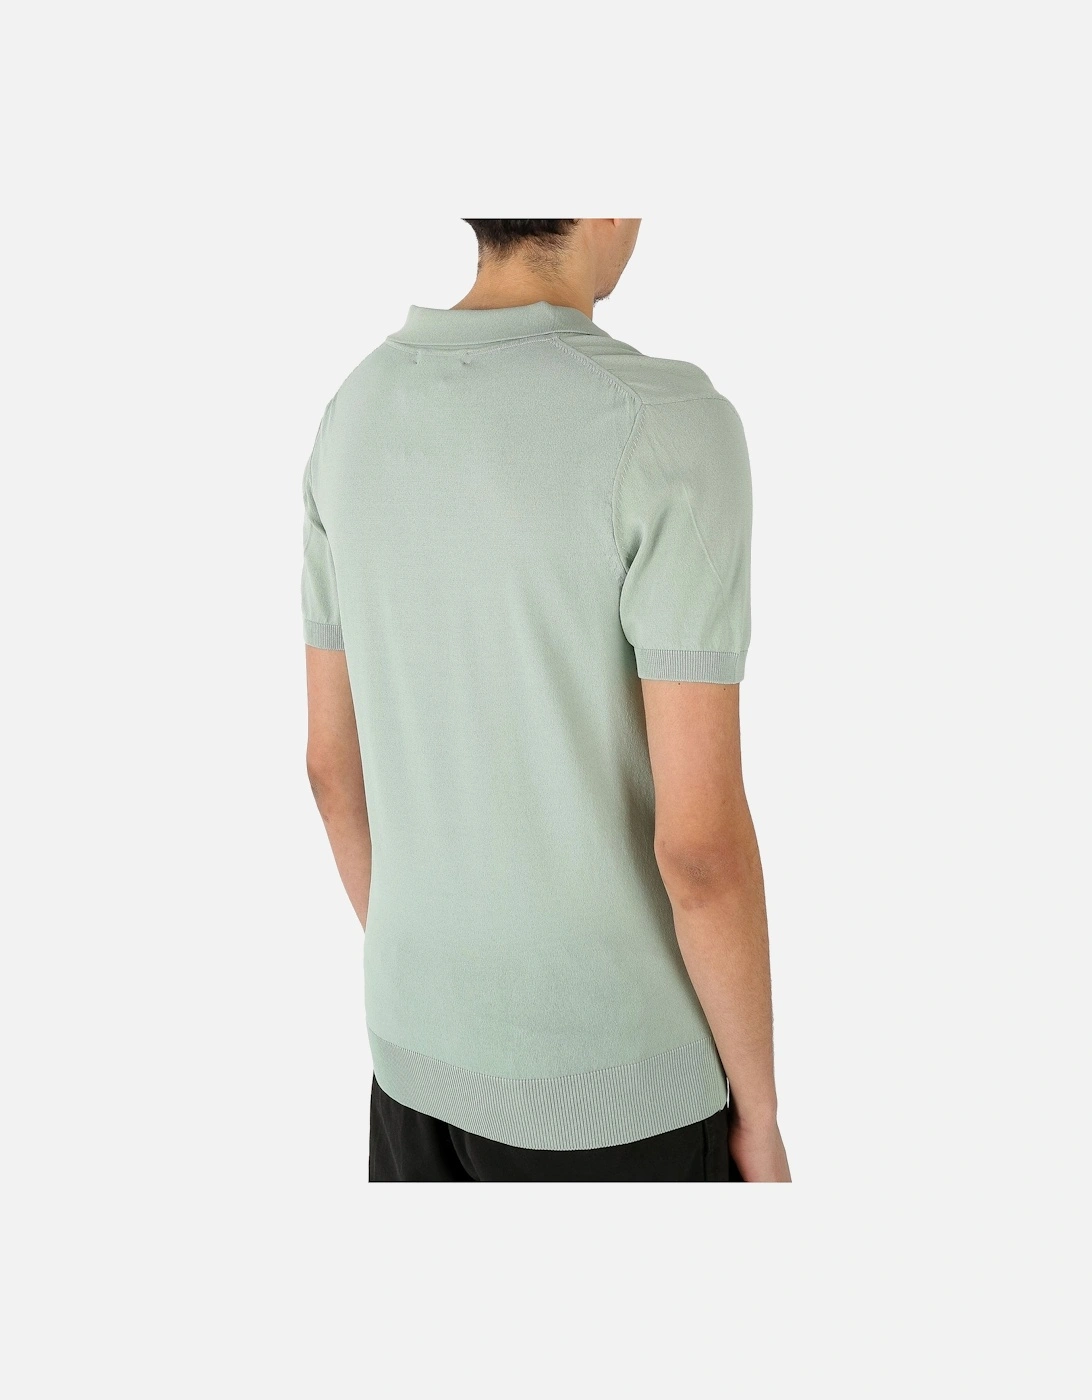 Open Collar Knitted Green Polo